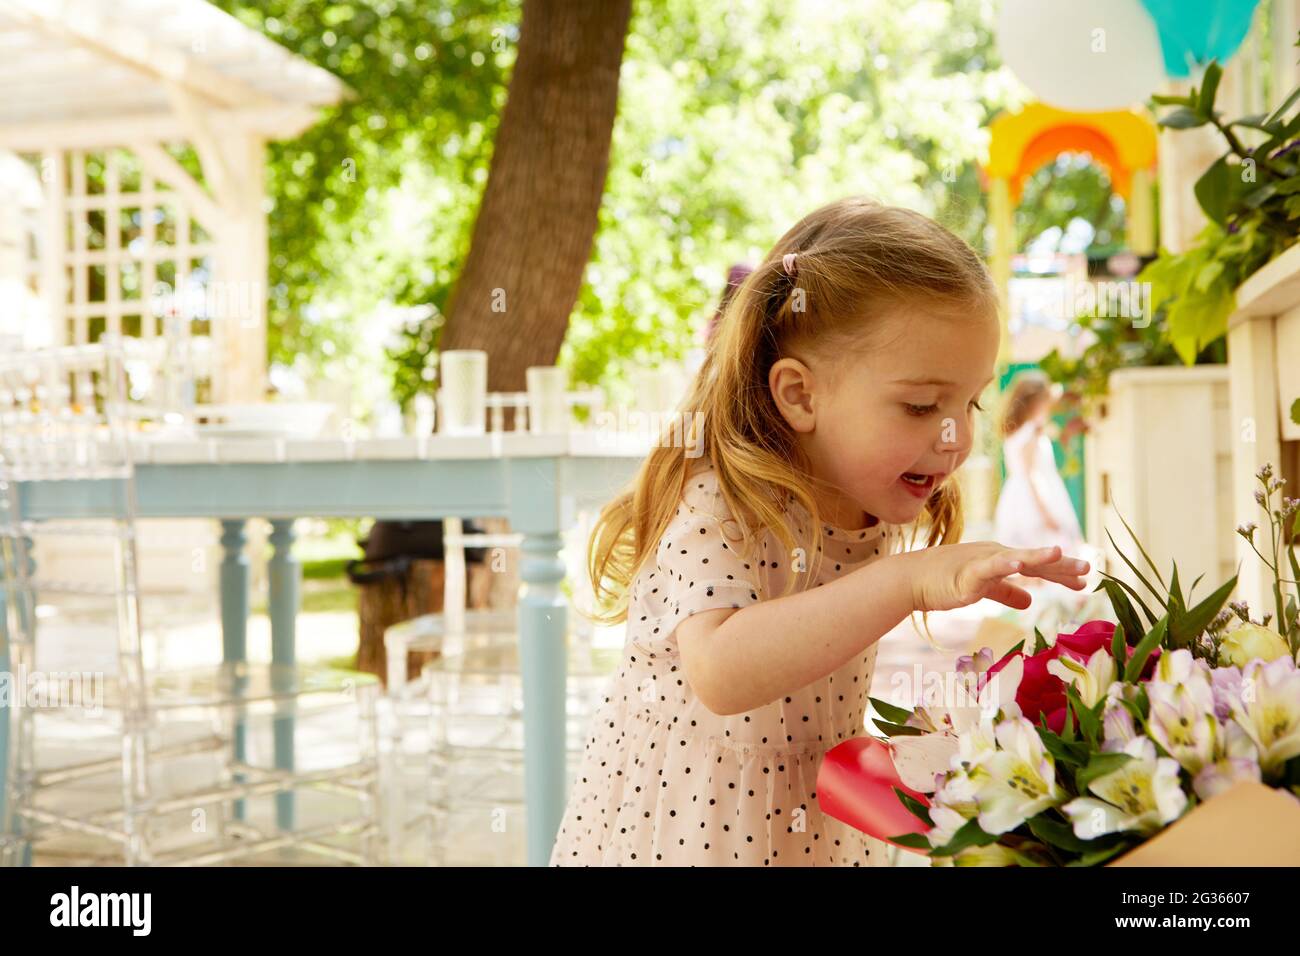 Side view of adorable little girl touching bouquet of flowers with interest in courtyard Stock Photo